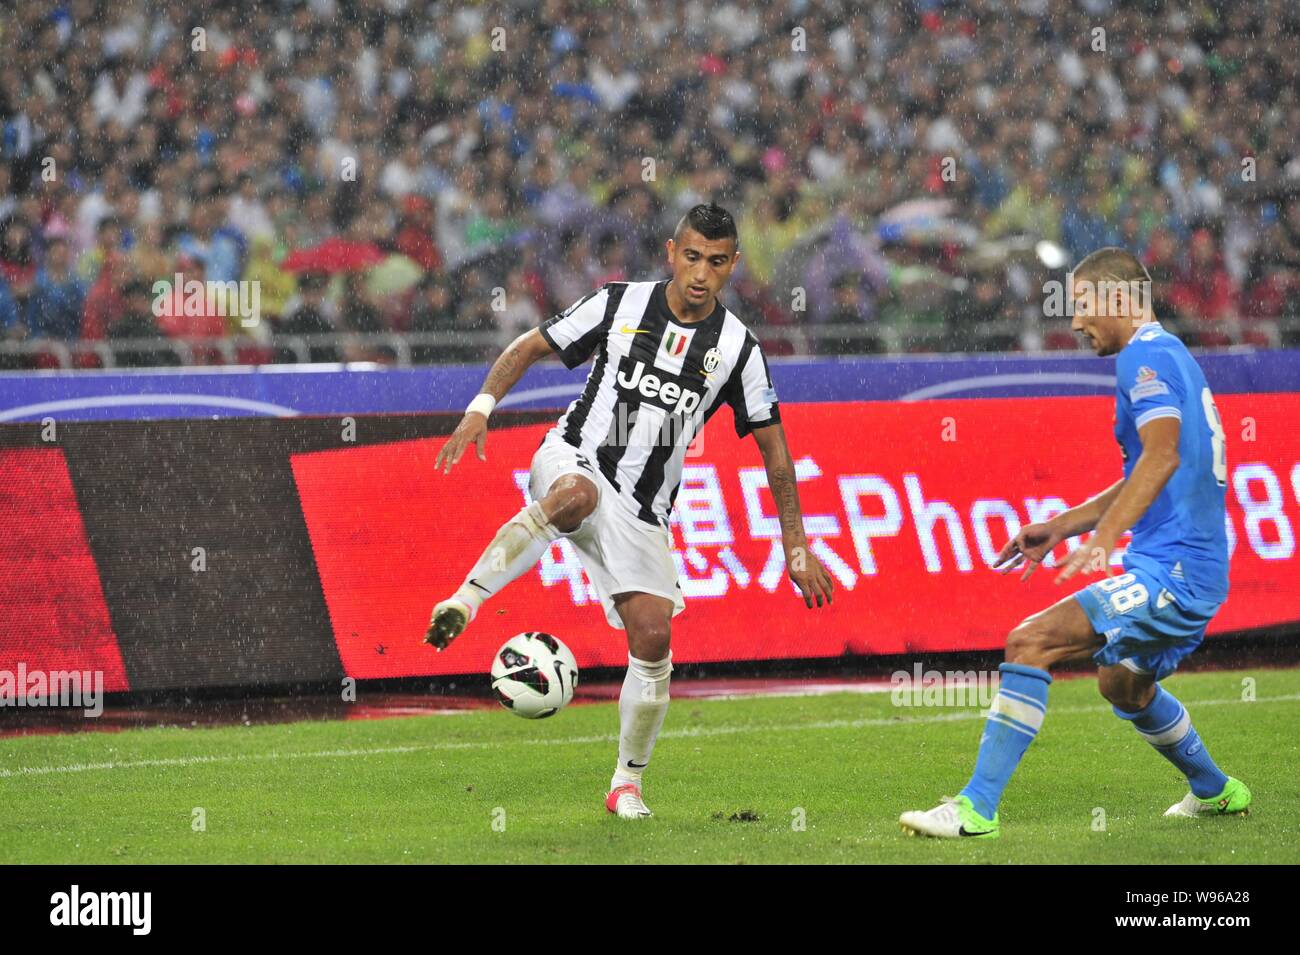 Arturo Erasmo Vidal Pardo of Juventus, left, challenges Gokhan Inler of Napoli during their Italian Super Cup football match at the National Stadium, Stock Photo